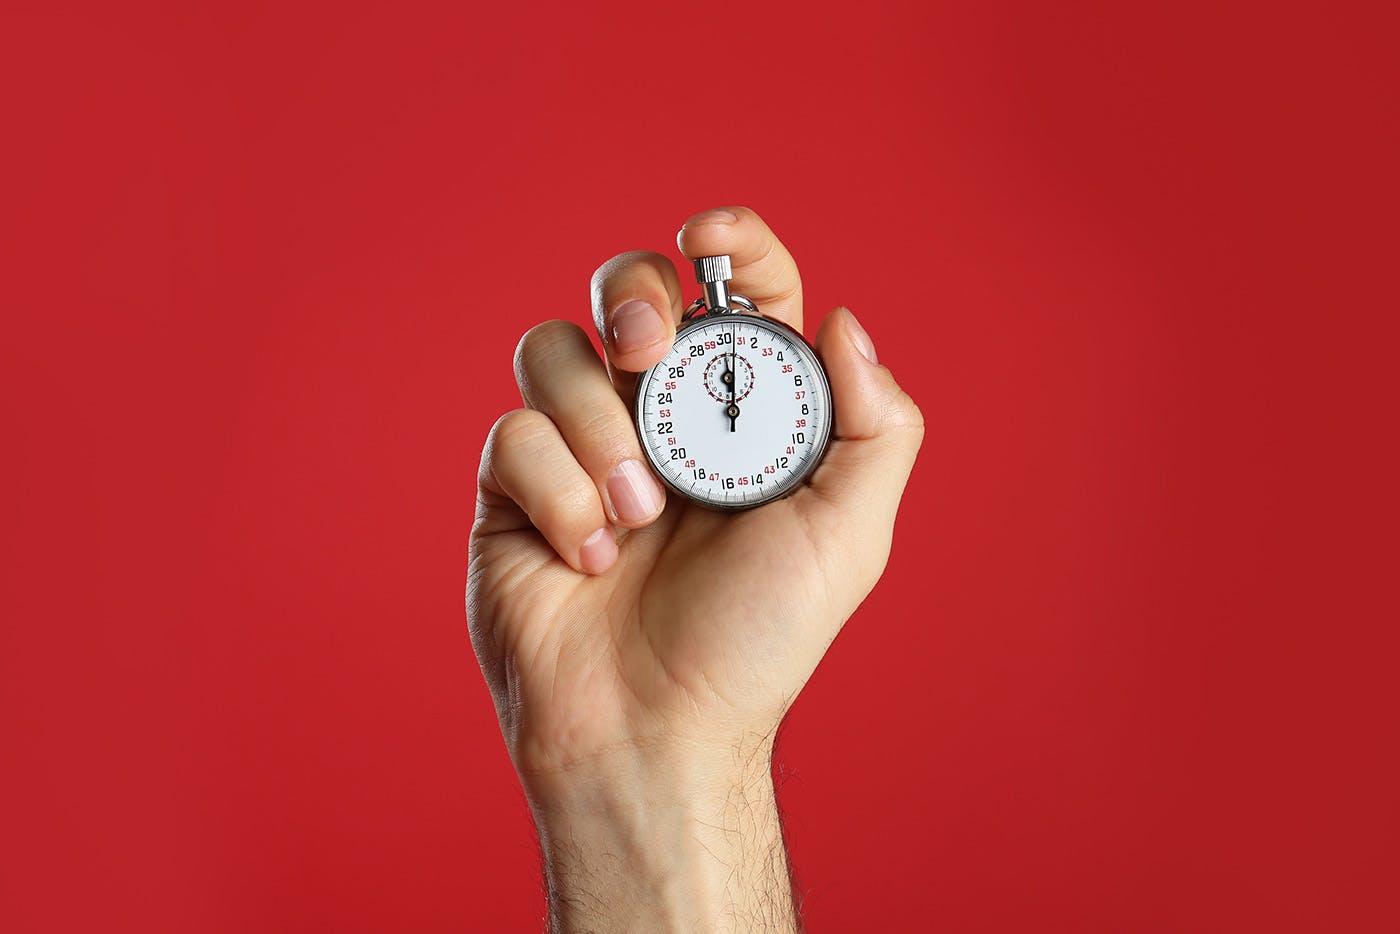 Stopwatch on red background being held in hand